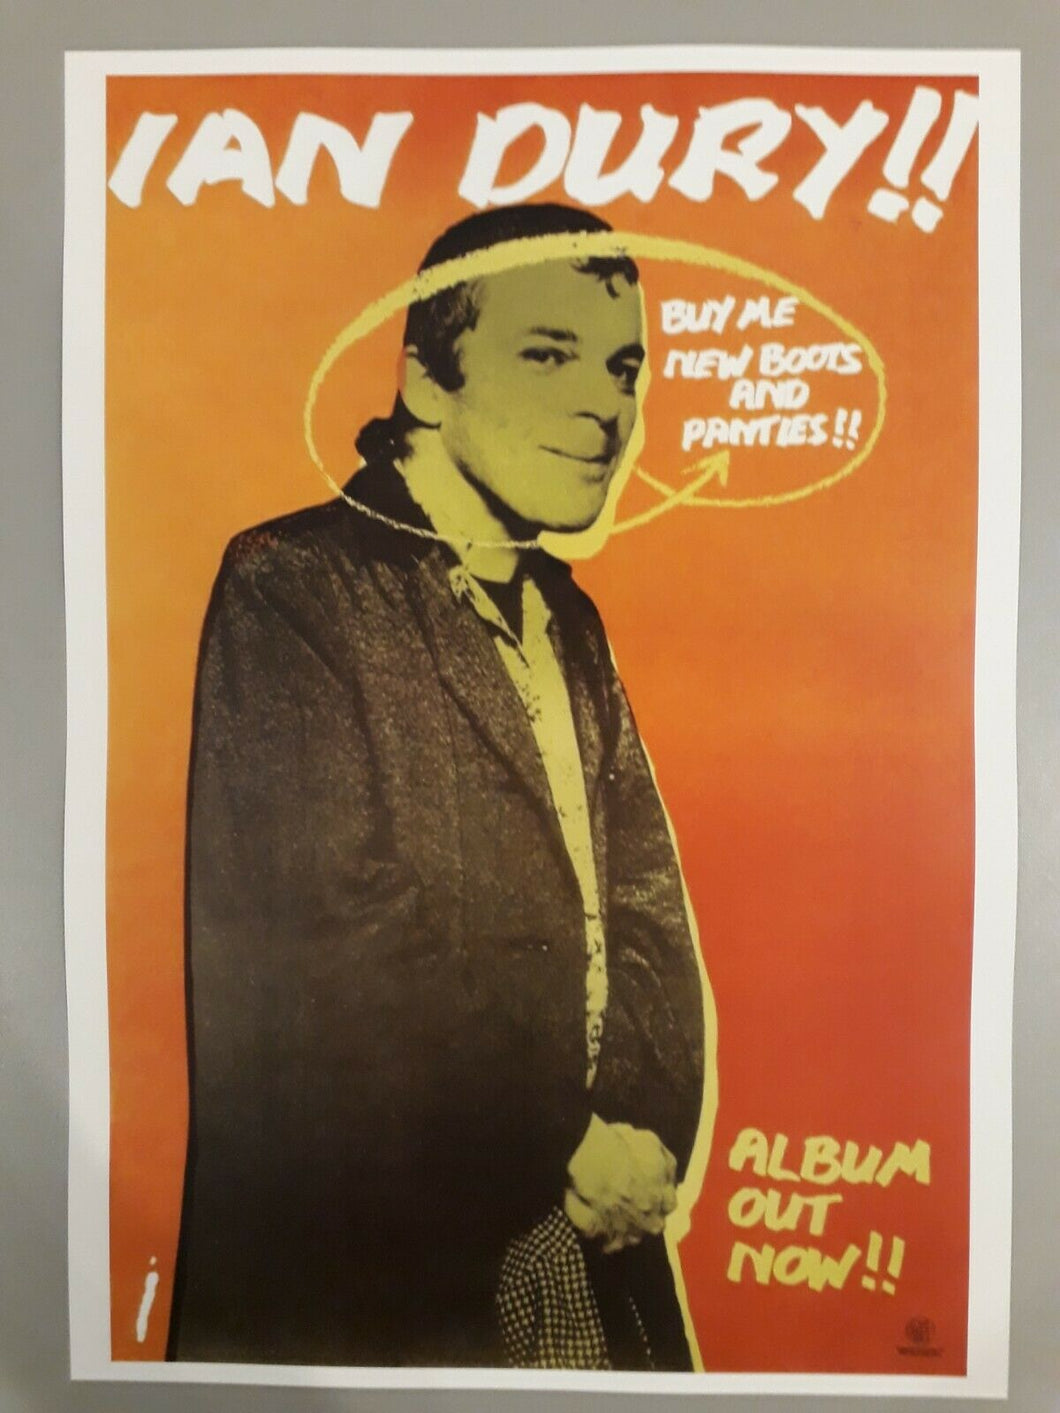 Ian Dury poster - New Boots & Panties release 1977 promotional A3 size reprint - Original Music and Movie Posters for sale from Bamalama - Online Poster Store UK London